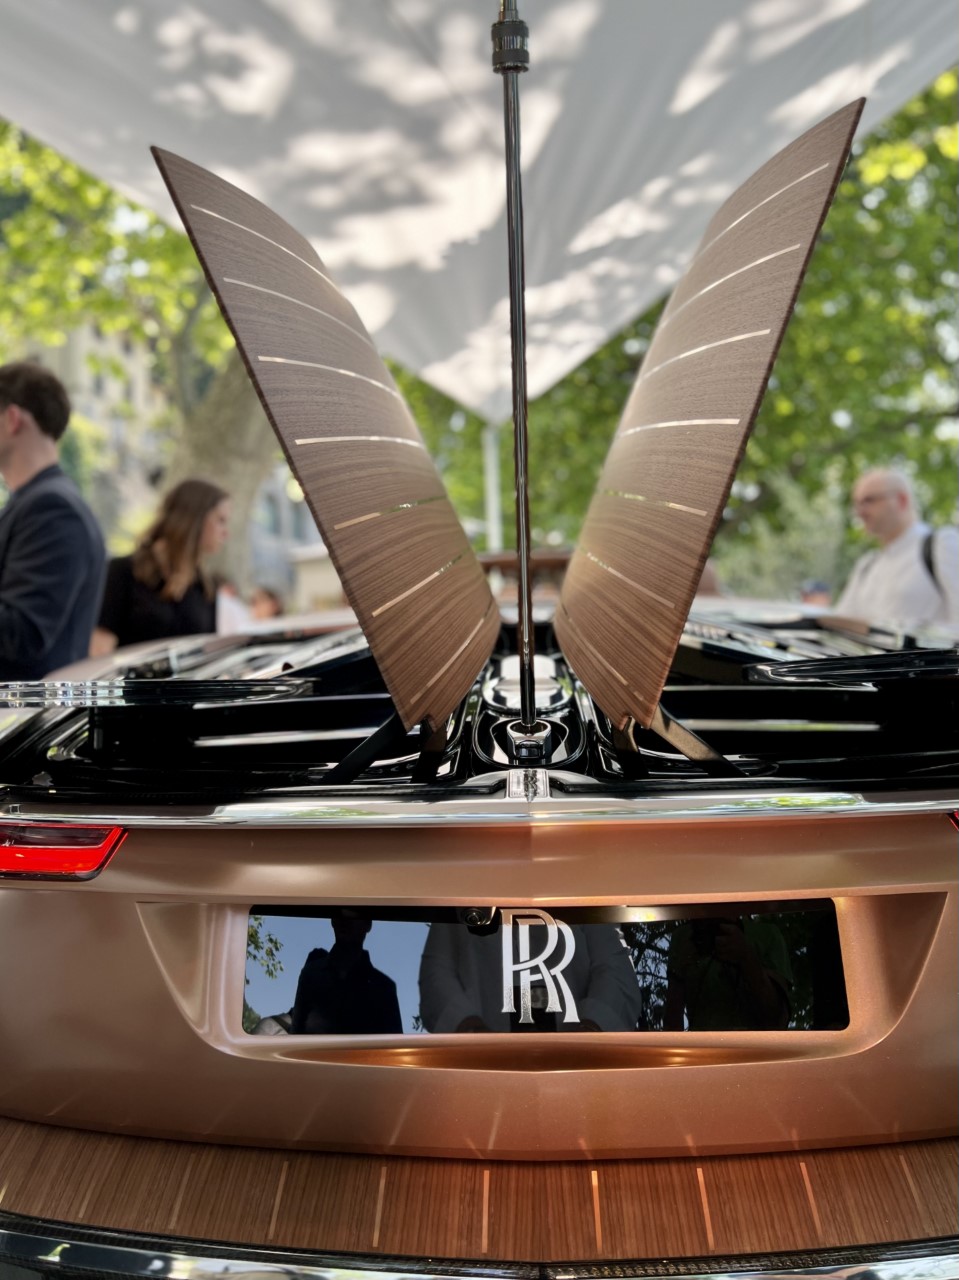 Latest Rolls-Royce Boat Tail Is A Custom Drop Top With Mother-of